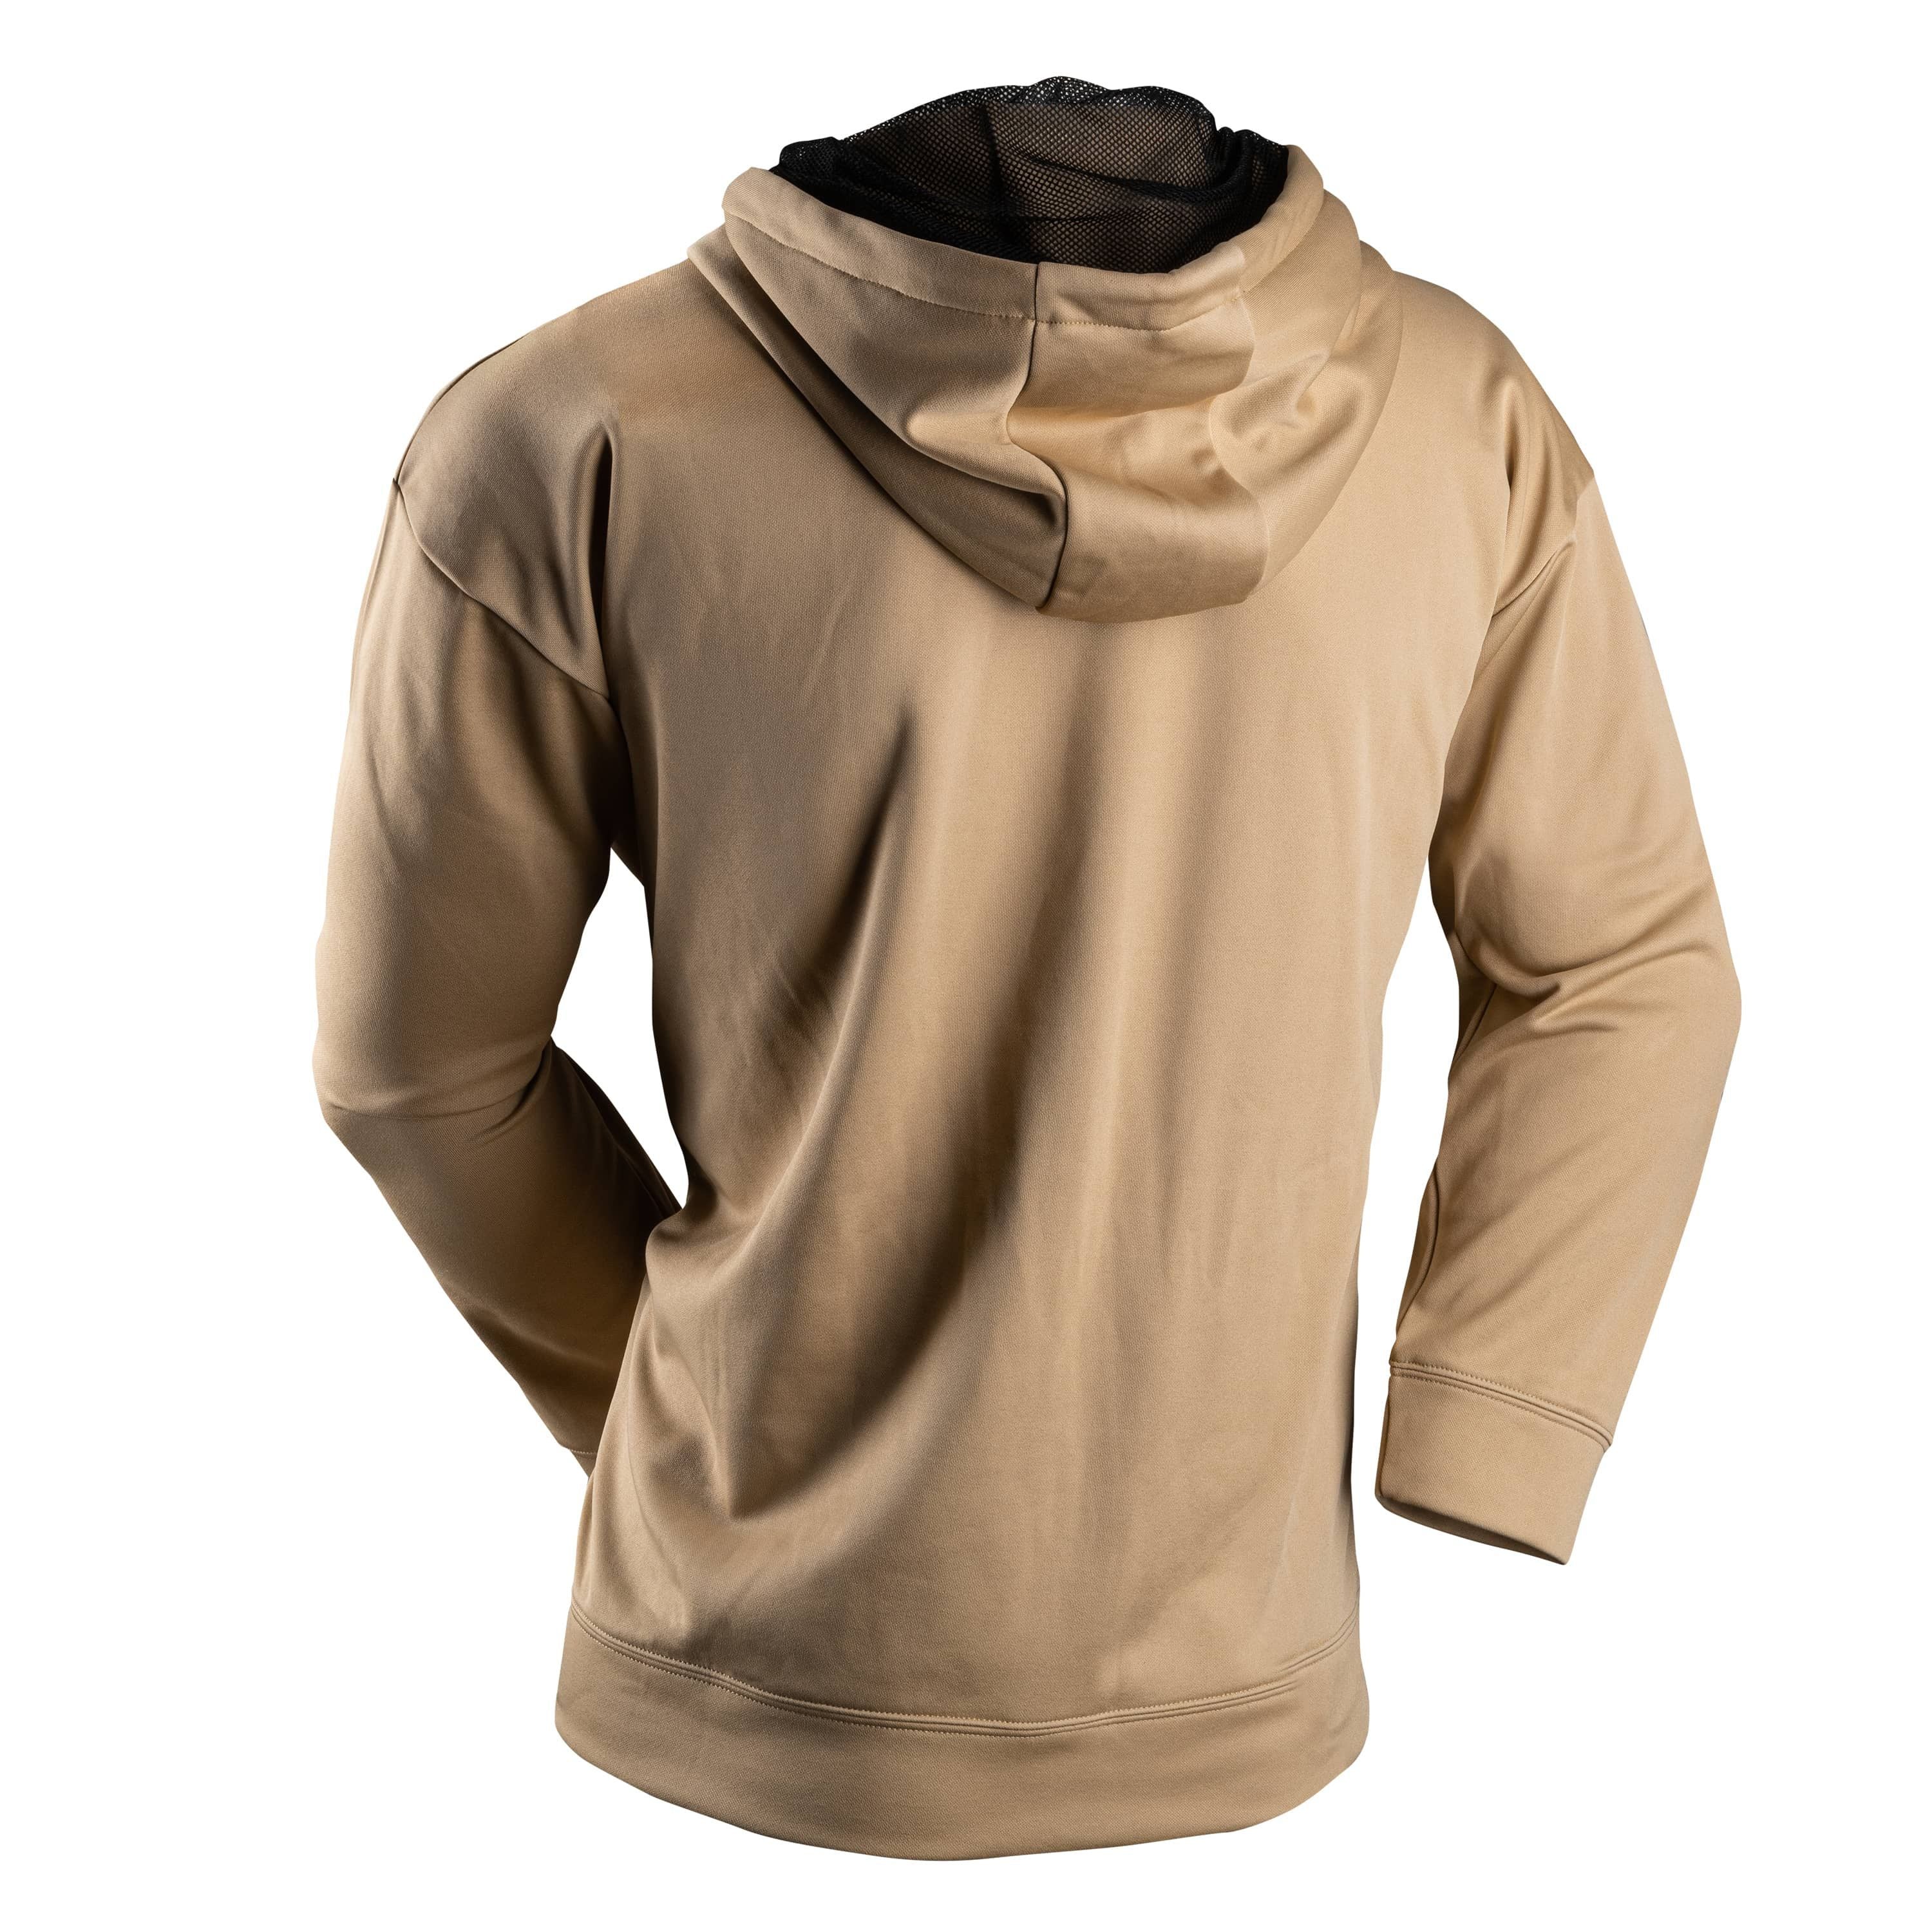 "Protect" Hooded sweater - Men's